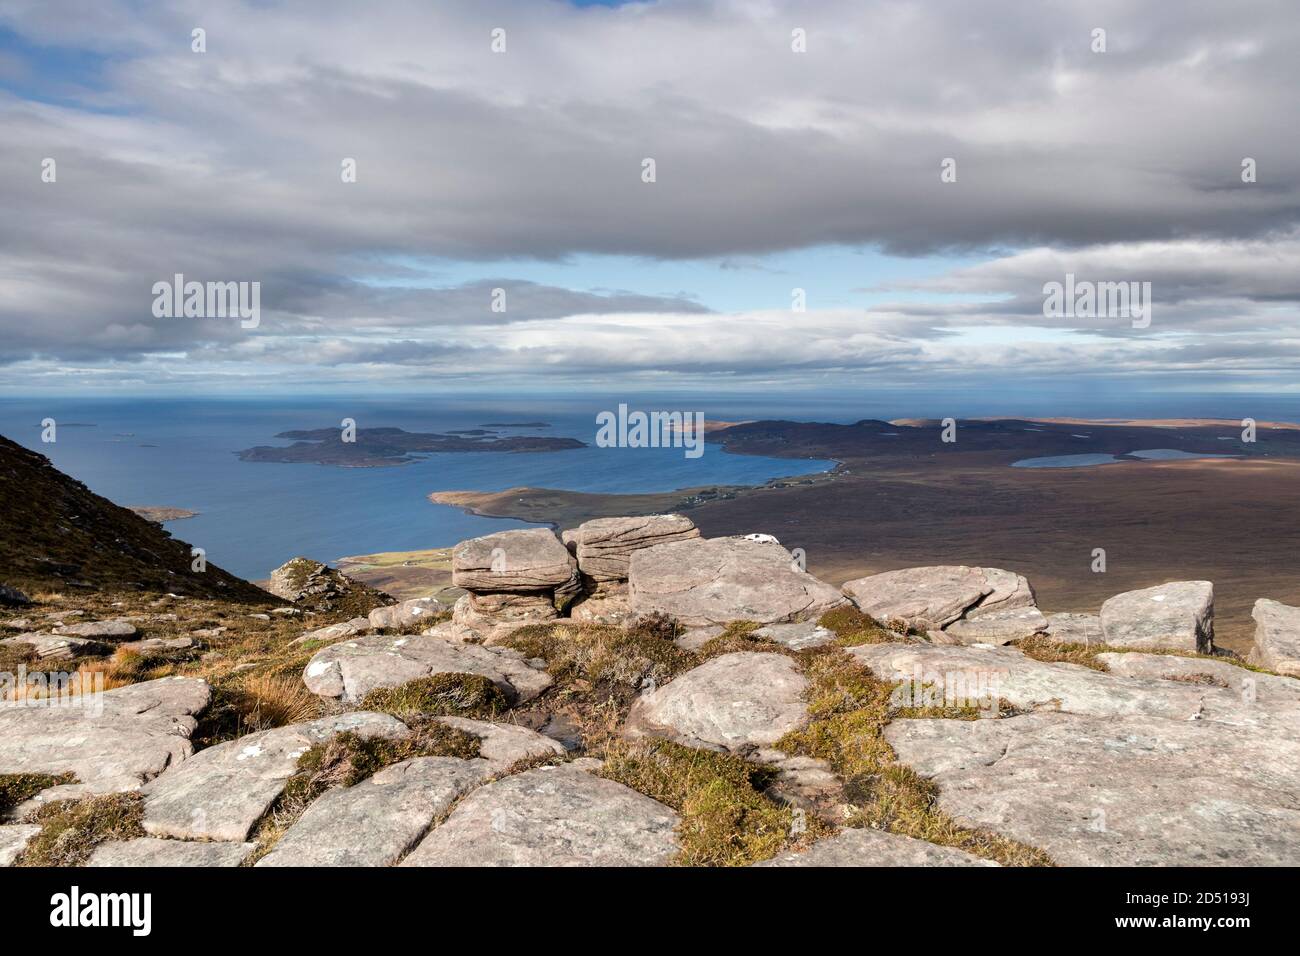 The View Towards the Tip of the Coigach Peninsula from the Mountain of Cairn Conmheall, Wester Ross, Northwest Highlands of Scotland, UK Stock Photo